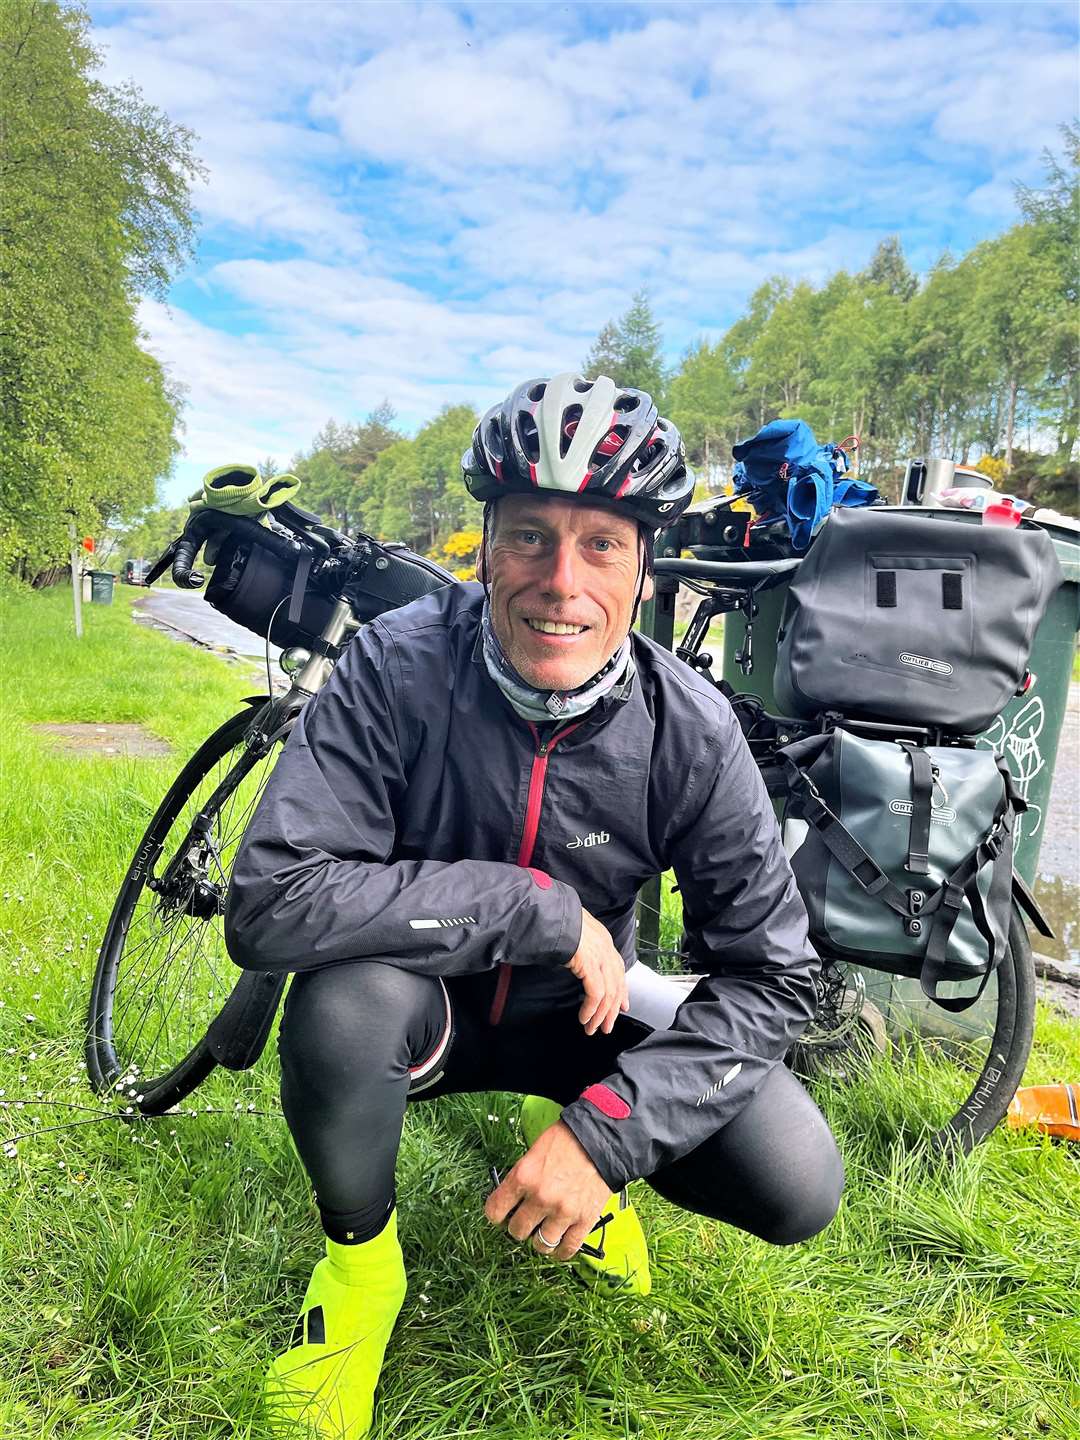 Tim Styles on his Lejog cycle ride last year. He is undertaking the same journey but including the return trip to make it a Lejogle.